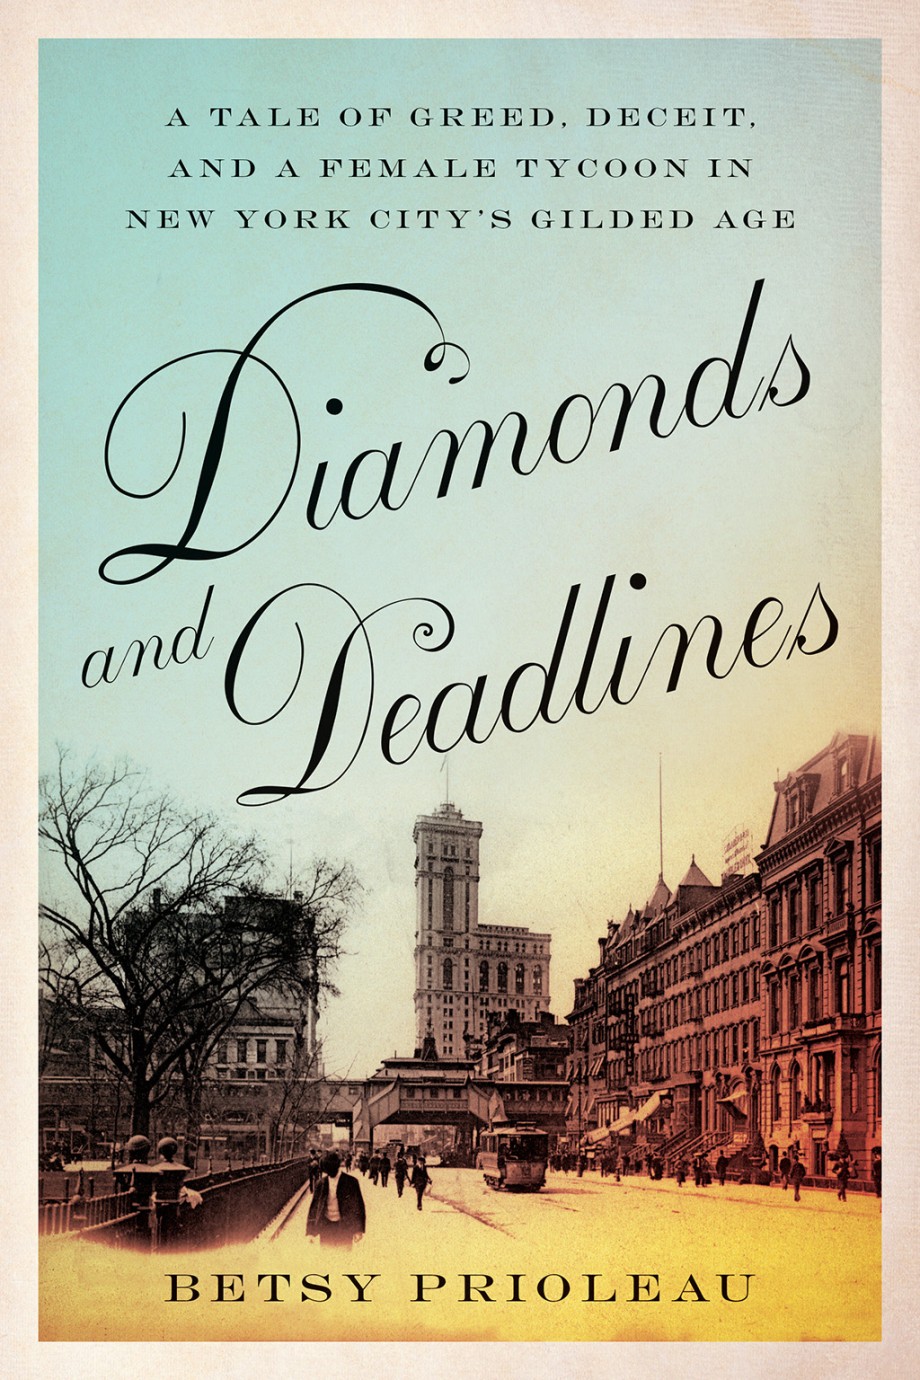 Diamonds and Deadlines A Tale of Greed, Deceit, and a Female Tycoon in the Gilded Age